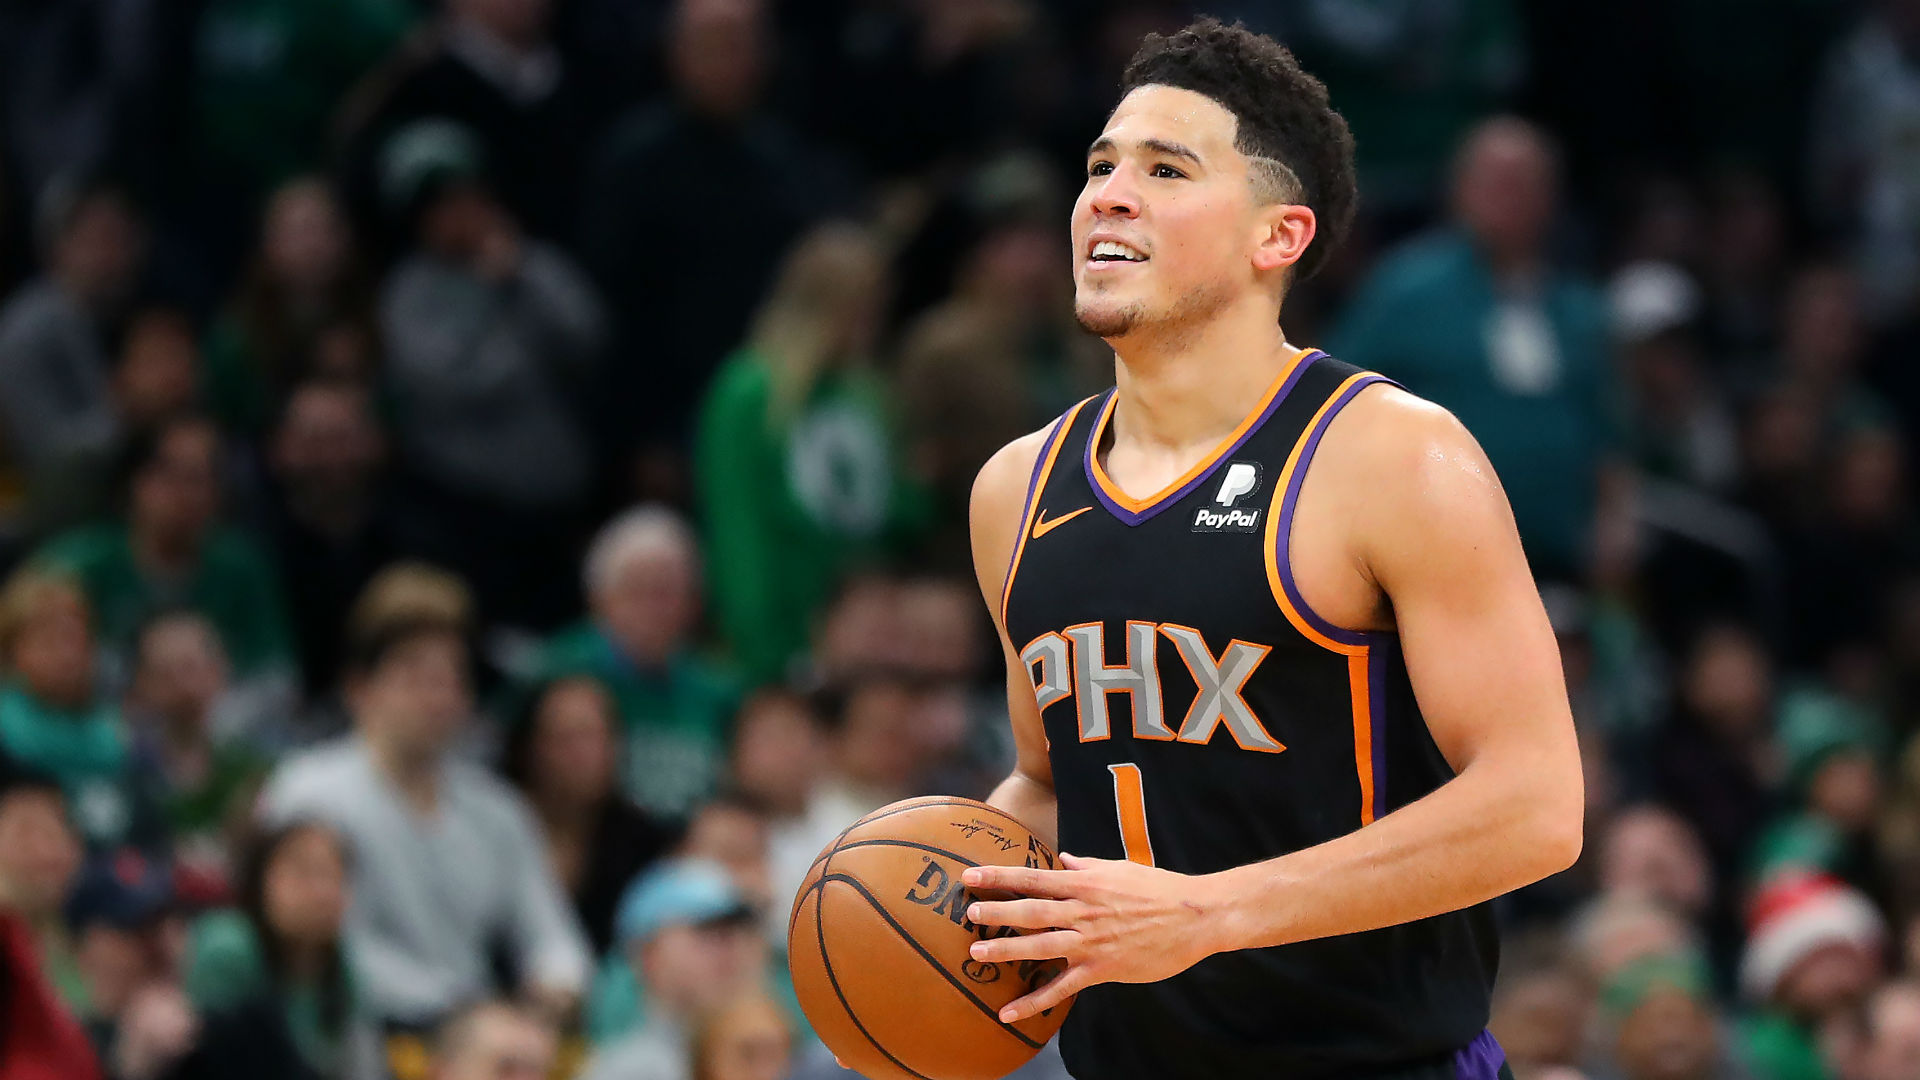 Download free Devin Booker Wallpaper 1920x1080 59379 available in different...